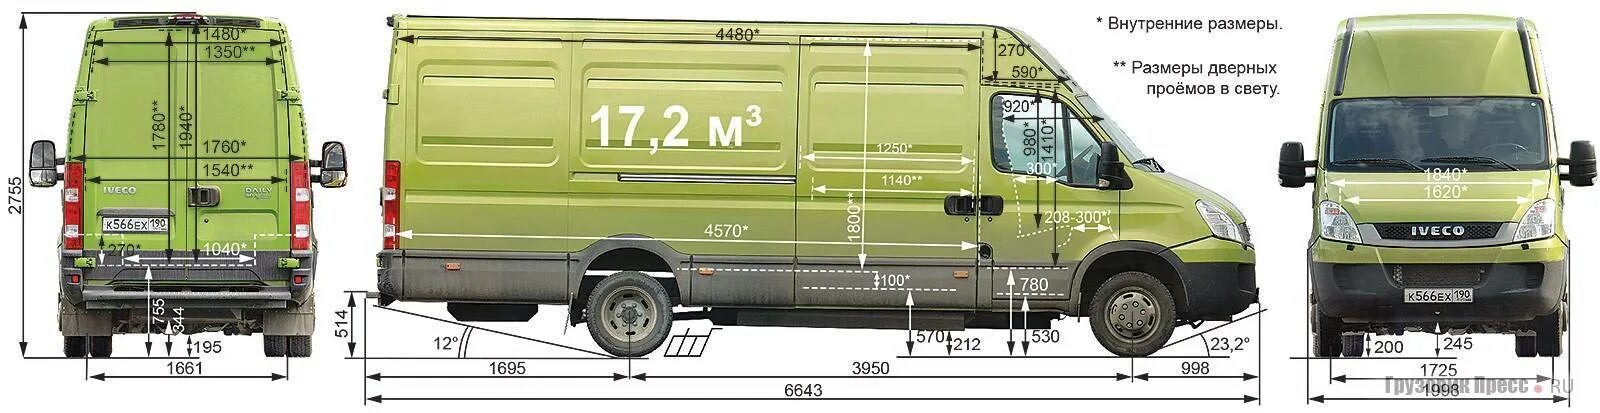 Iveco Daily 35 габариты. Iveco Daily габариты фургона. Iveco Daily 35s12 габариты. Iveco Daily габариты кузова.